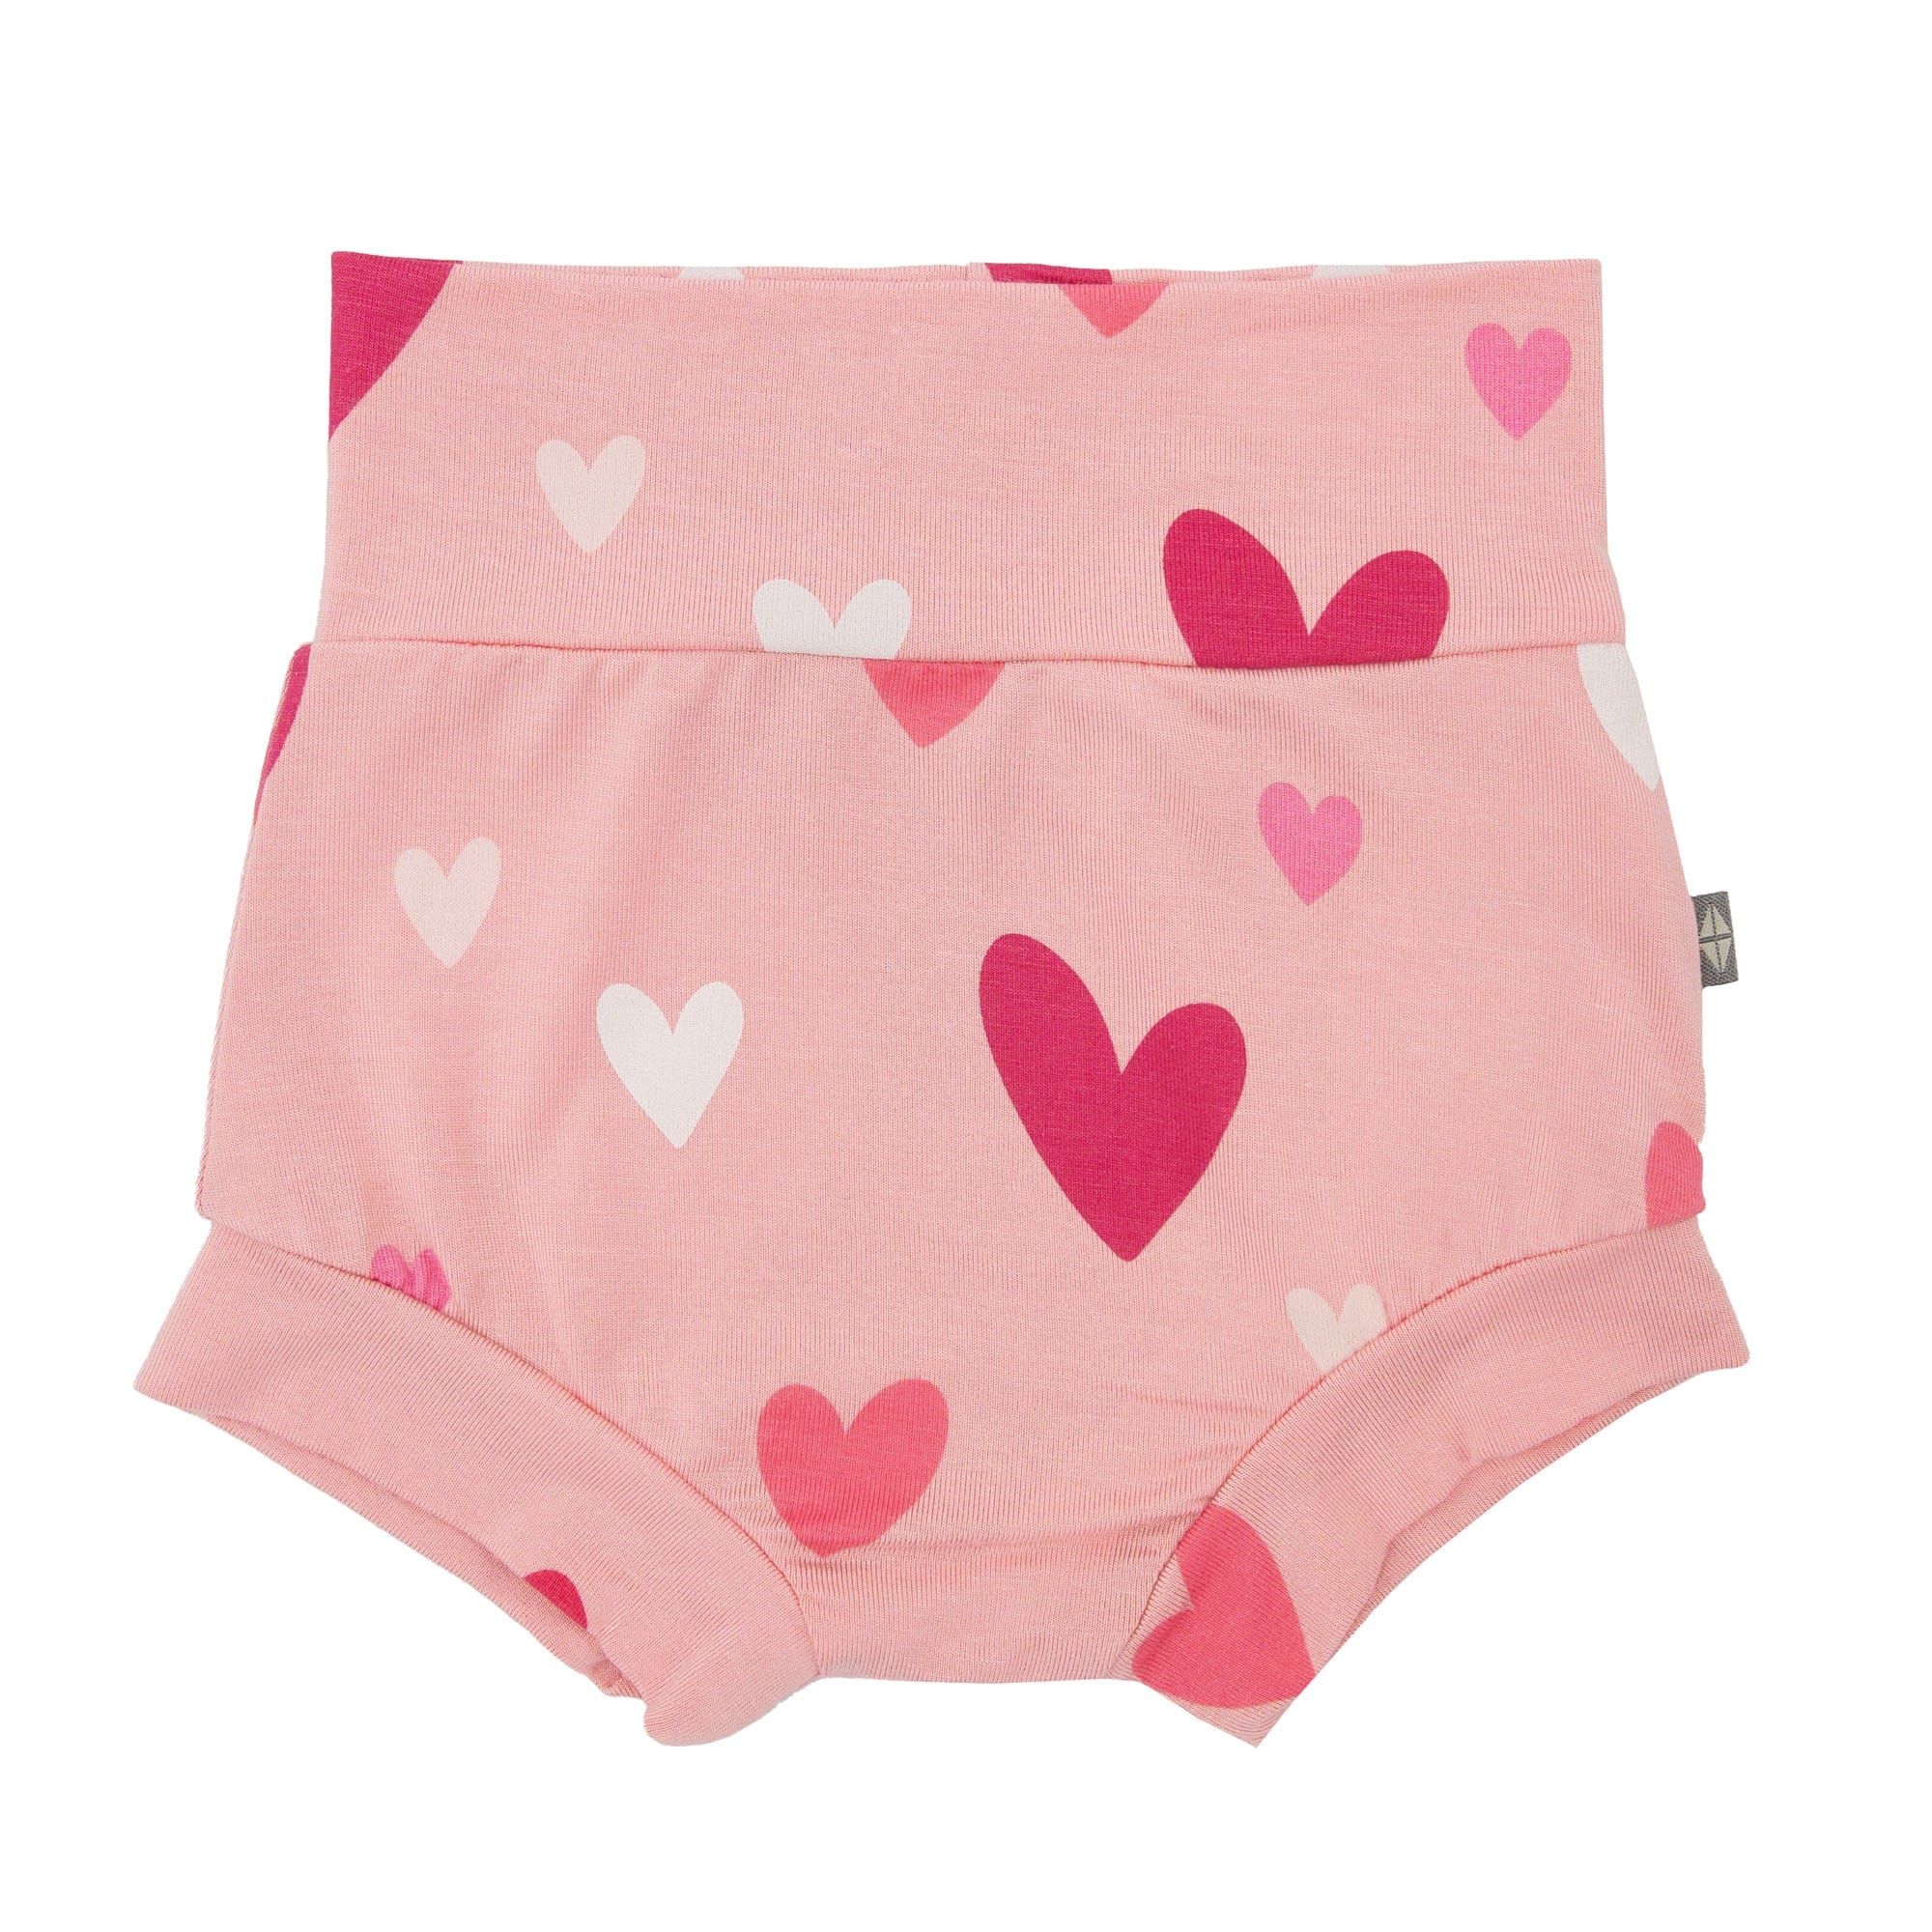 Bummies in Crepe Hearts | Kyte BABY